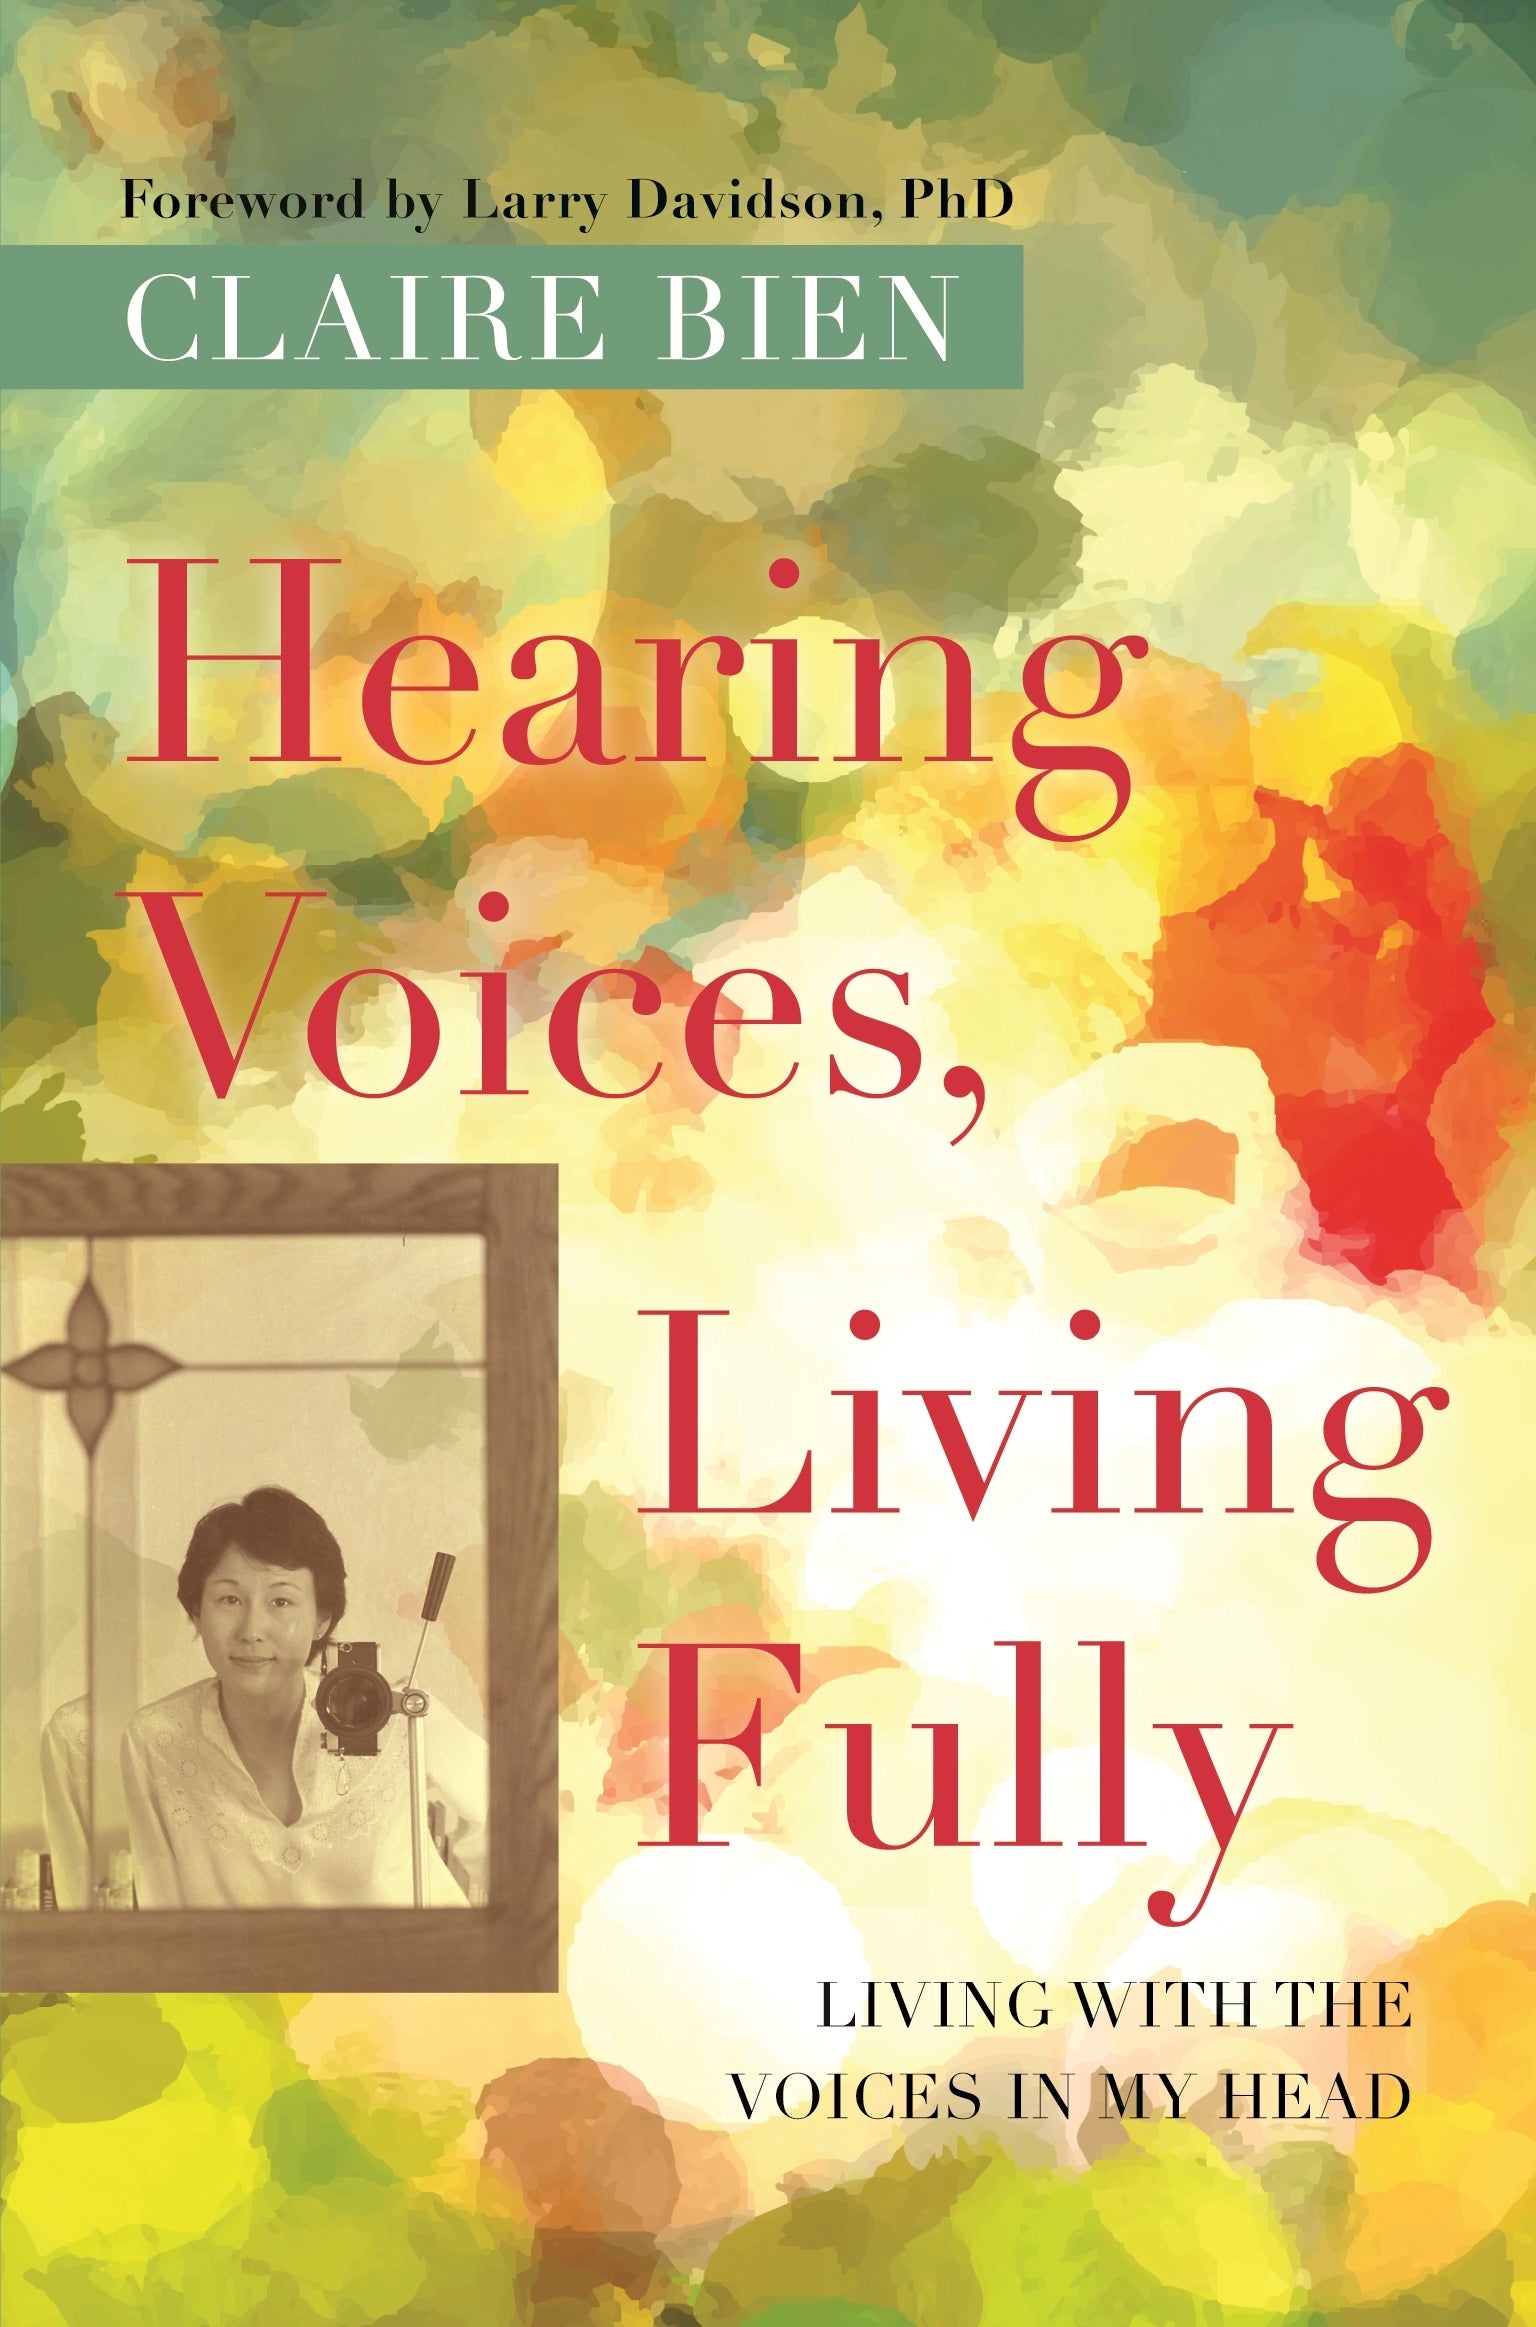 Hearing Voices, Living Fully by Larry Davidson, Claire Bien